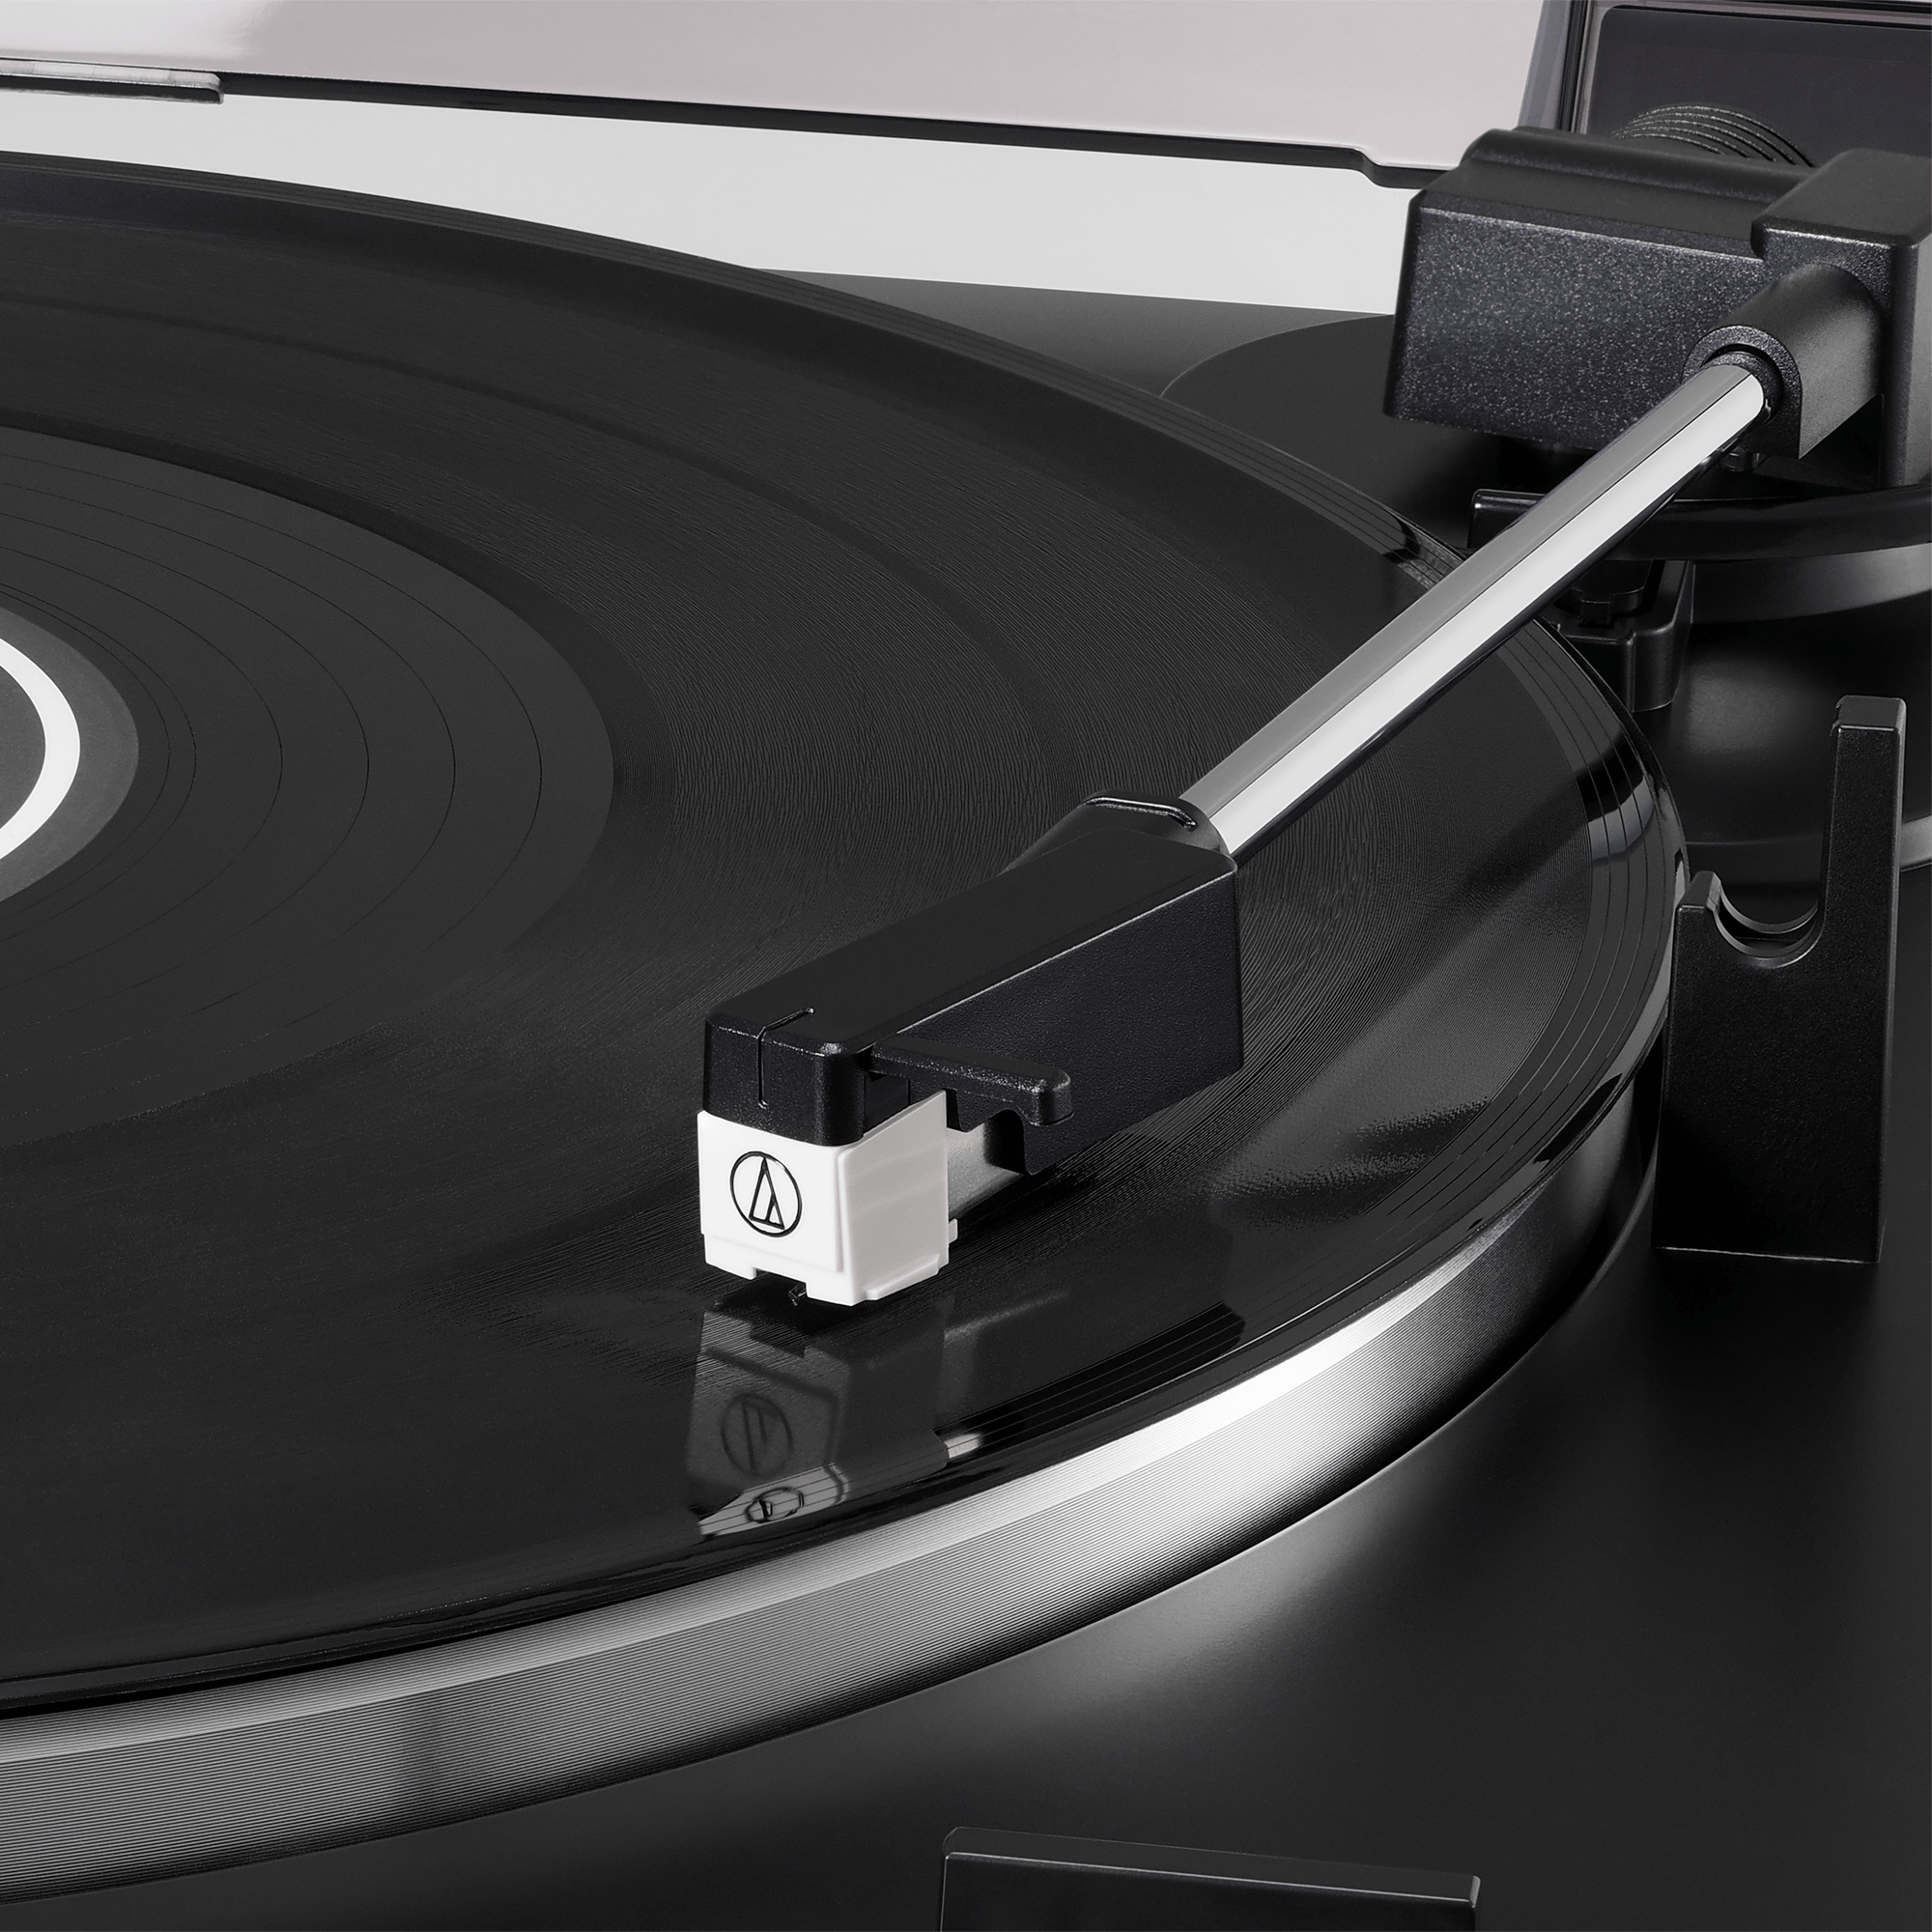 Fully Automatic Belt-Drive Stereo Turntable | AT-LP60X | Audio 